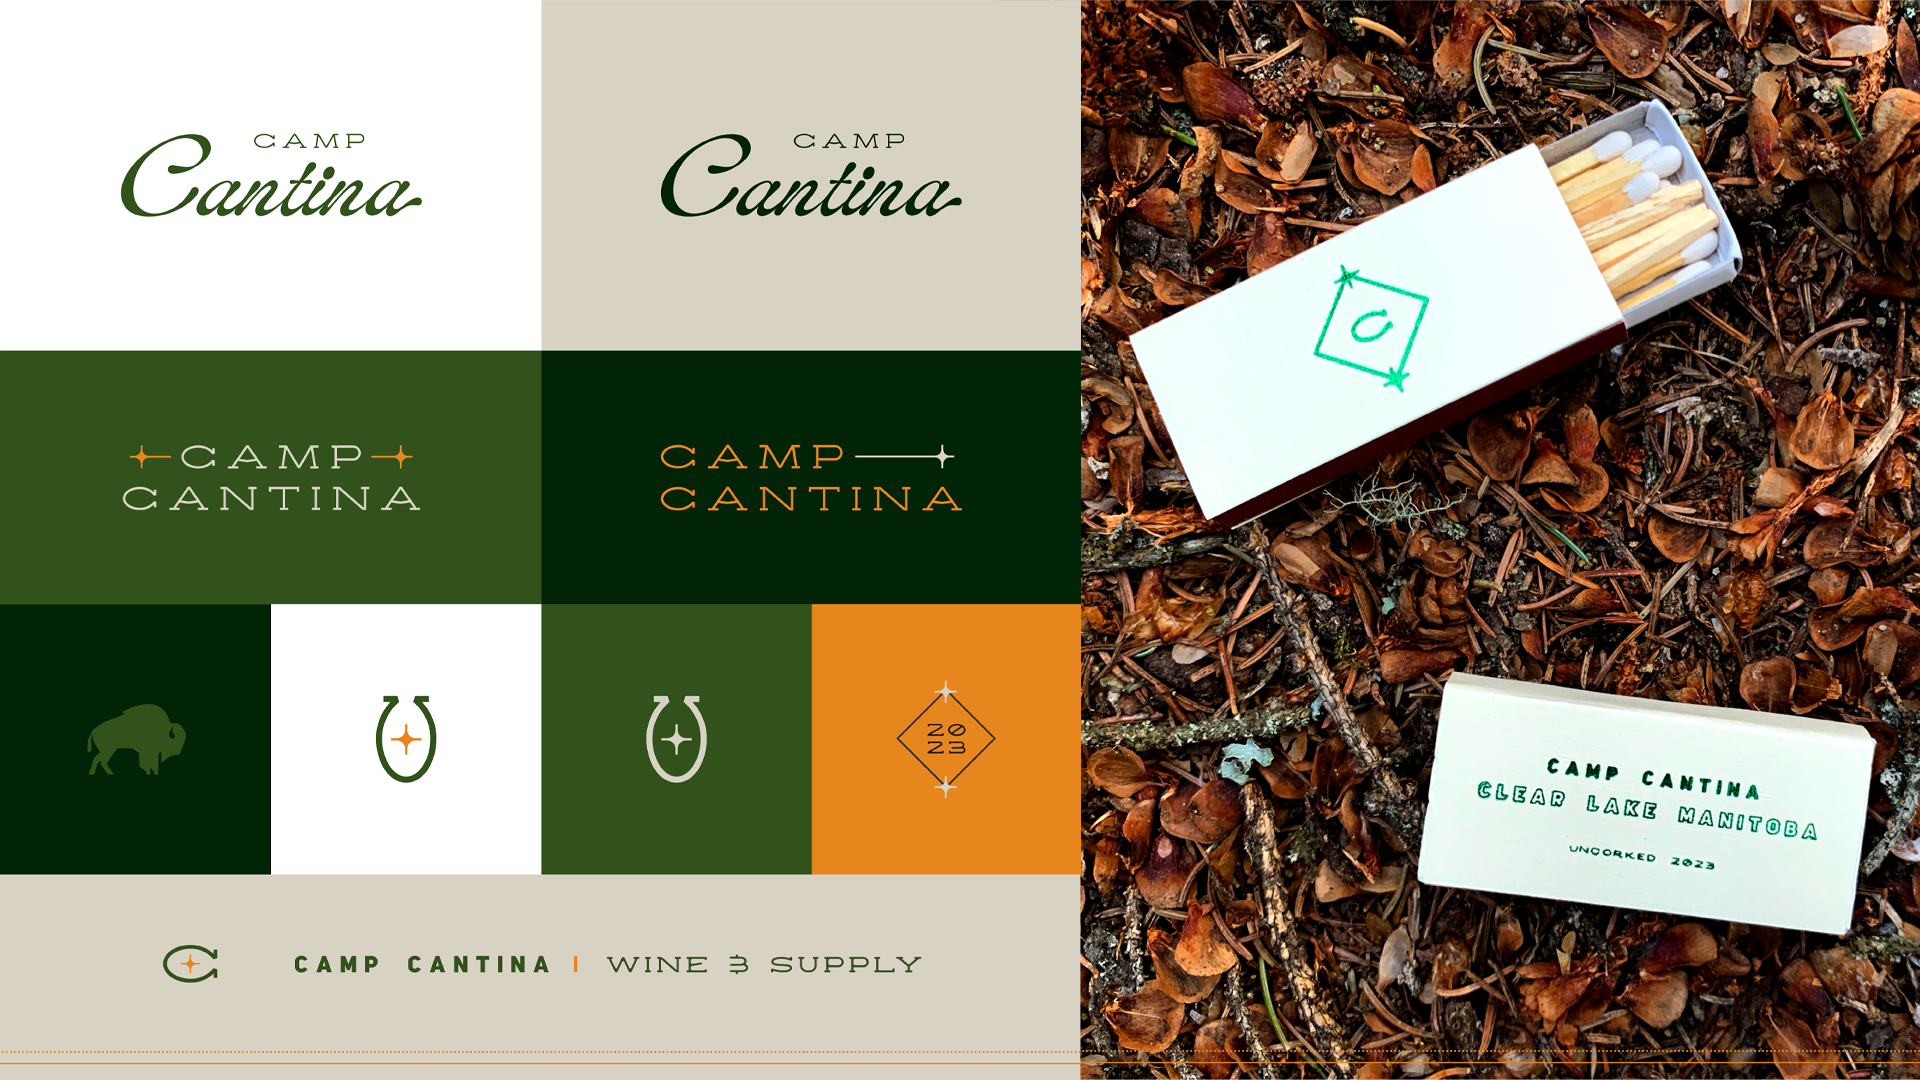 Camp Cantina branding and motifs with a mockup on a box of matches.